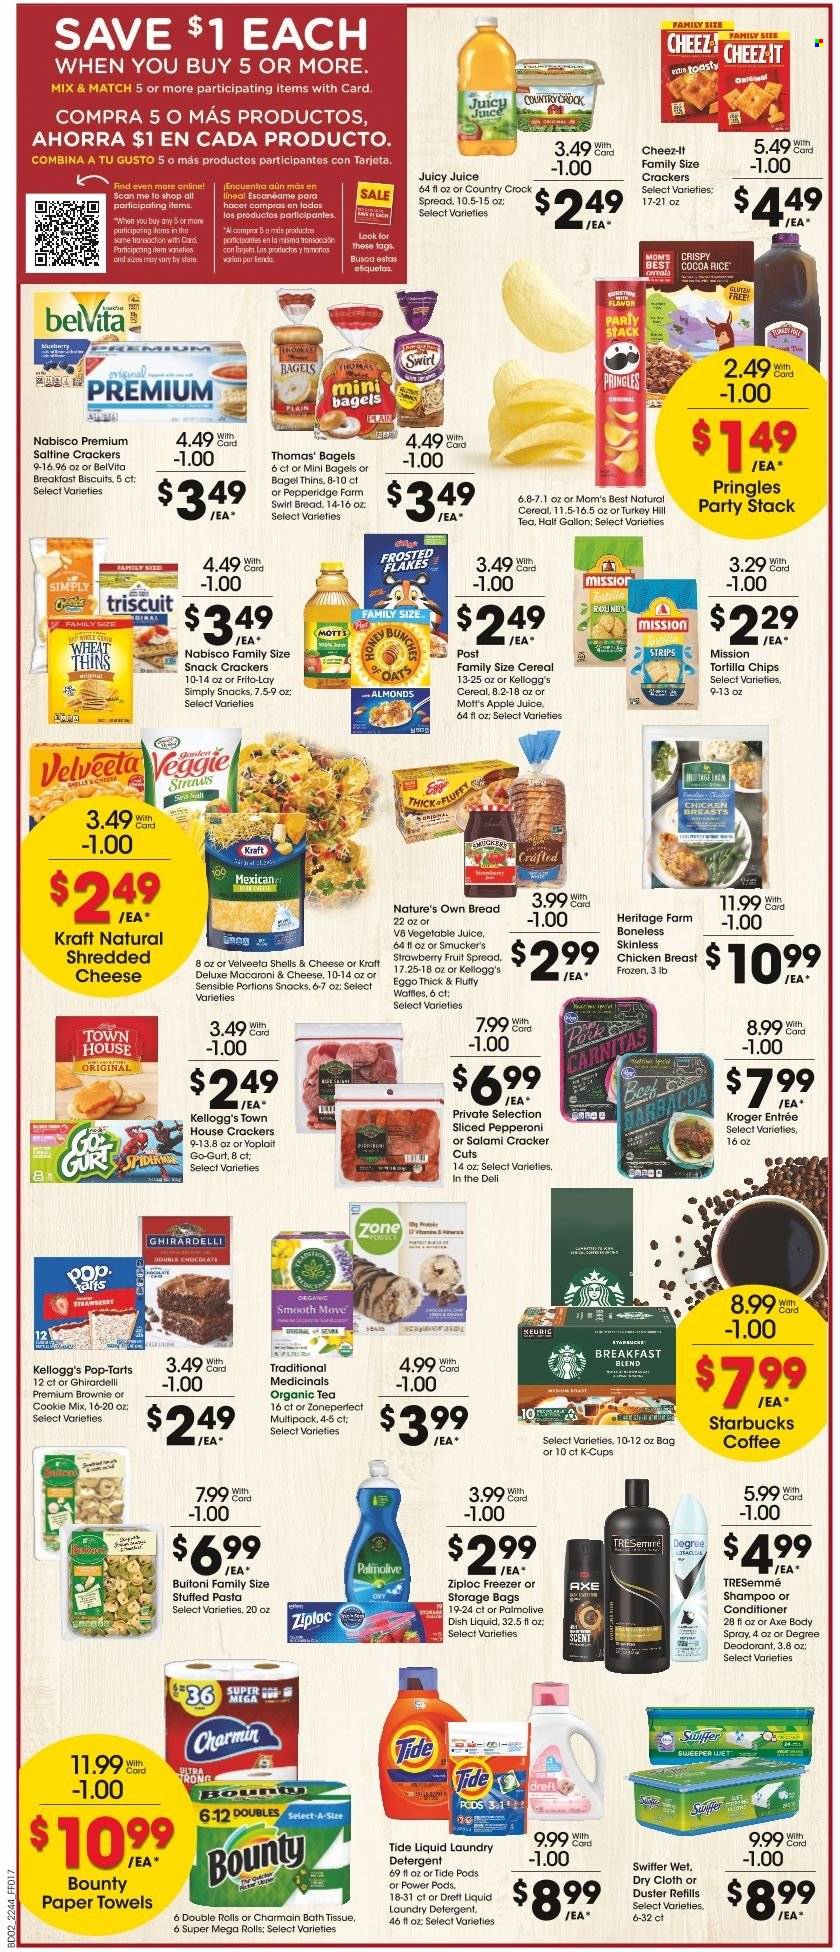 thumbnail - Fry’s Flyer - 11/30/2022 - 12/06/2022 - Sales products - bagels, brownies, waffles, Mott's, macaroni & cheese, pasta, Kraft®, Buitoni, salami, pepperoni, shredded cheese, Yoplait, strips, chocolate, snack, Bounty, crackers, Kellogg's, biscuit, Pop-Tarts, Ghirardelli, tortilla chips, Pringles, Thins, Frito-Lay, Cheez-It, cereals, belVita, Mom's Best, cocoa rice, almonds, apple juice, juice, vegetable juice, tea, coffee, Starbucks, coffee capsules, K-Cups, chicken breasts, bath tissue, kitchen towels, paper towels, Charmin, detergent, Swiffer, Tide, laundry detergent, dishwashing liquid, shampoo, Palmolive, conditioner, TRESemmé, body spray, anti-perspirant, deodorant, Axe, Ziploc, storage bag, duster, freezer, Nature's Own. Page 2.